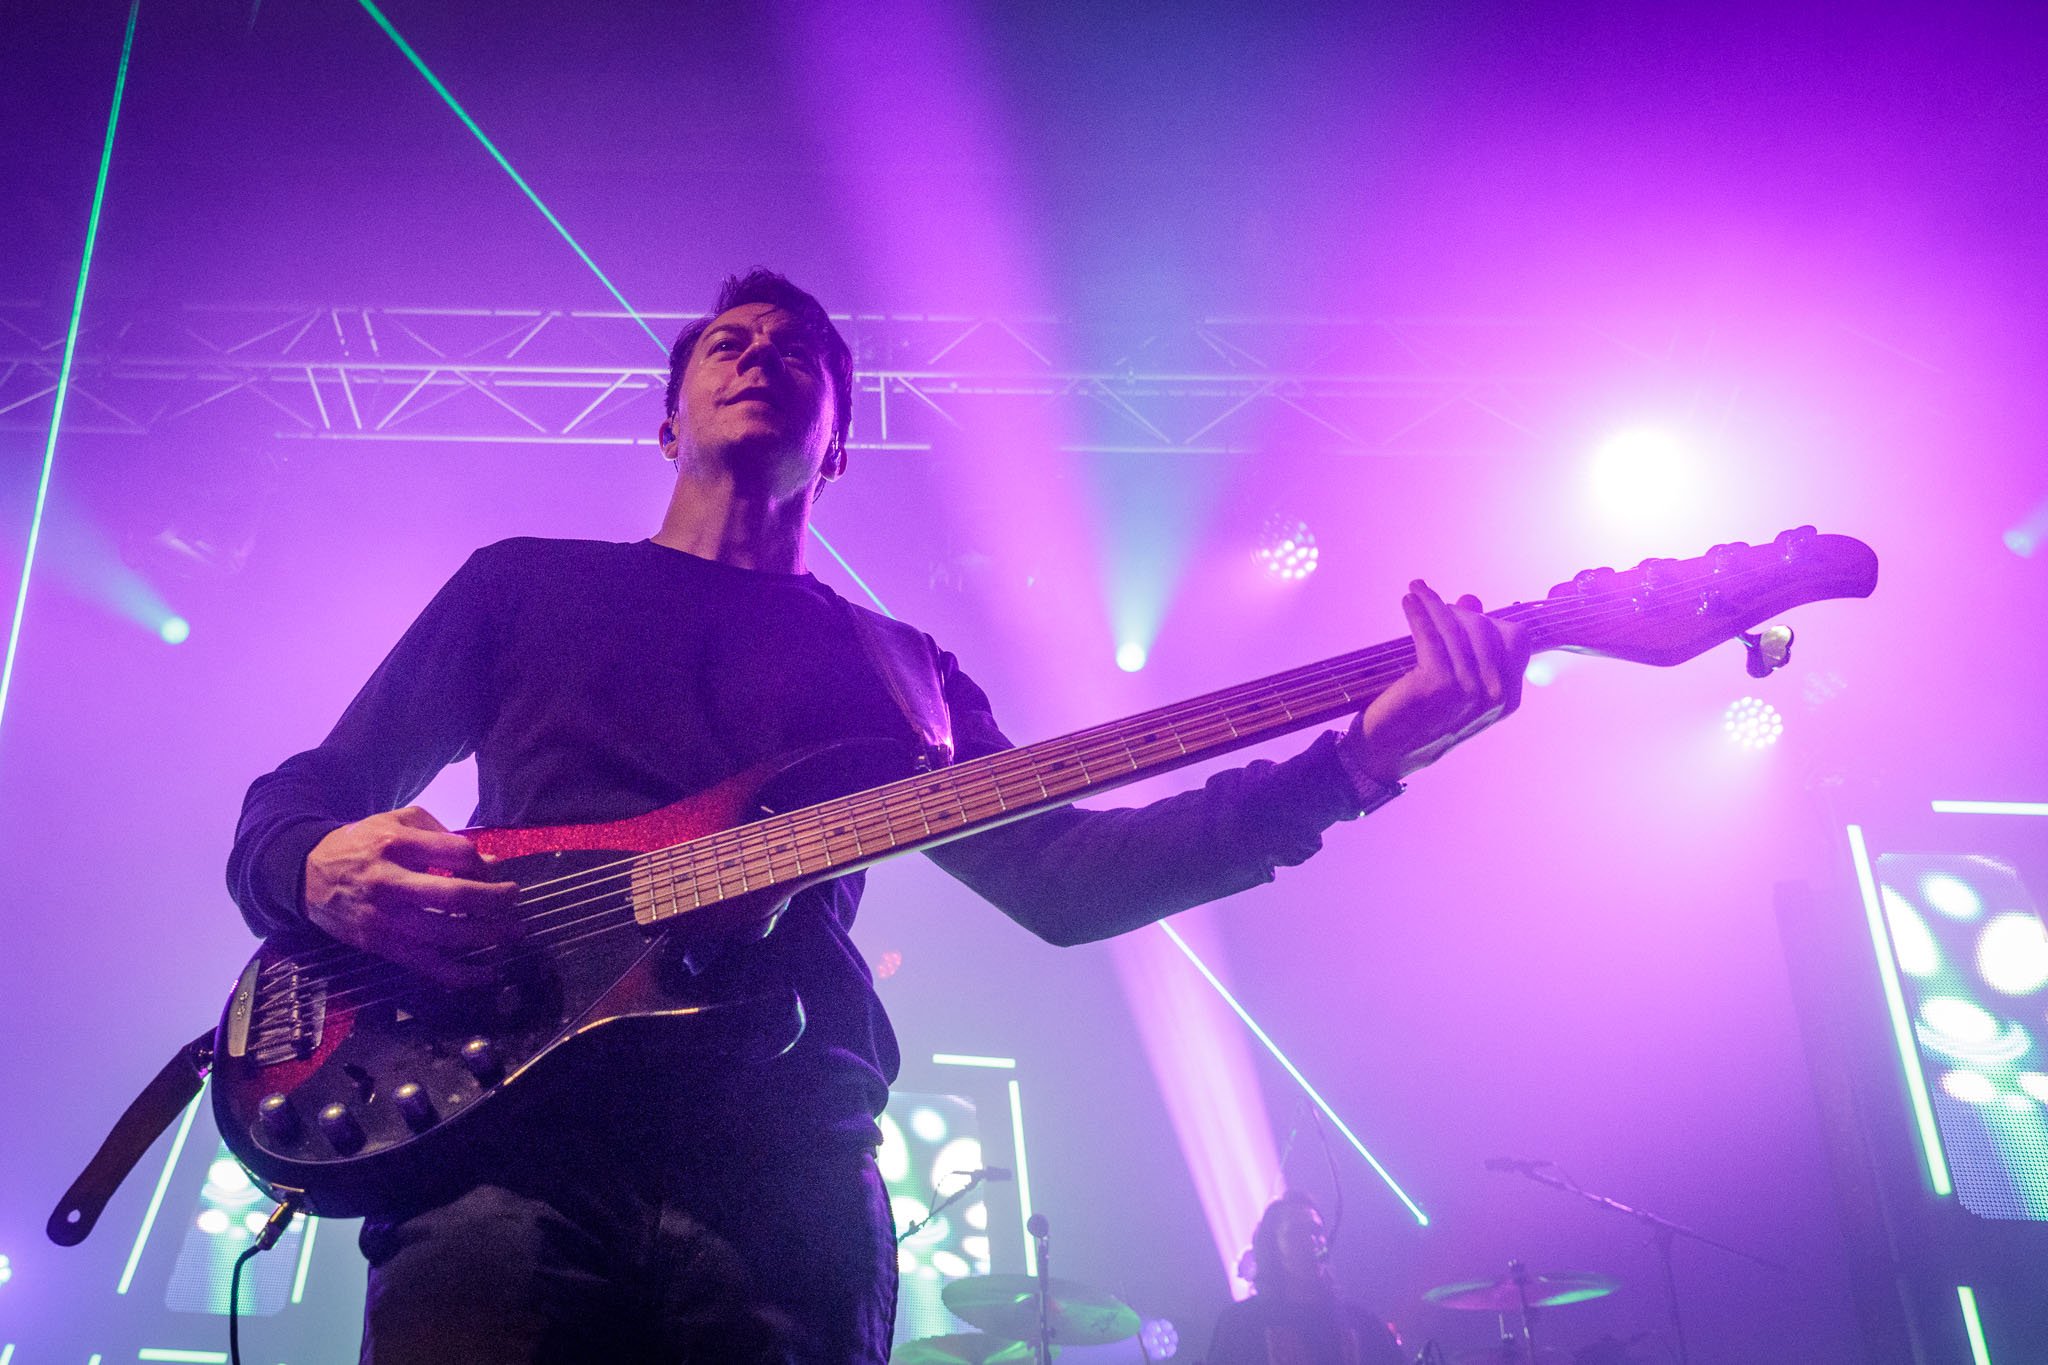 Don Broco at the Manchester Academy on October 28th 2021 ©Johan